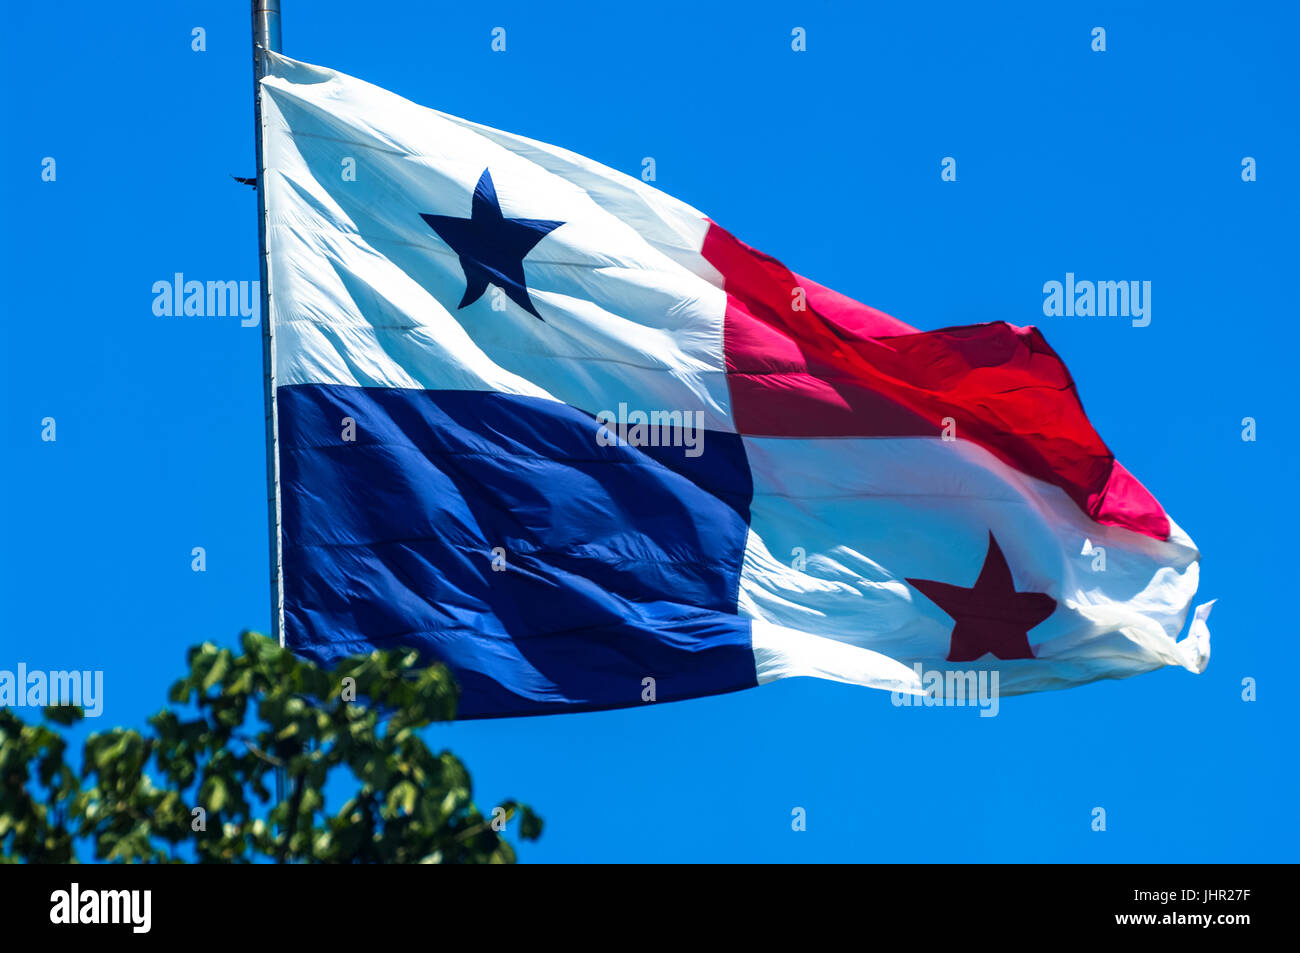 National flag of Panama flying in the wind with blue sky in the background from the Ancon Hill in Panama City Stock Photo